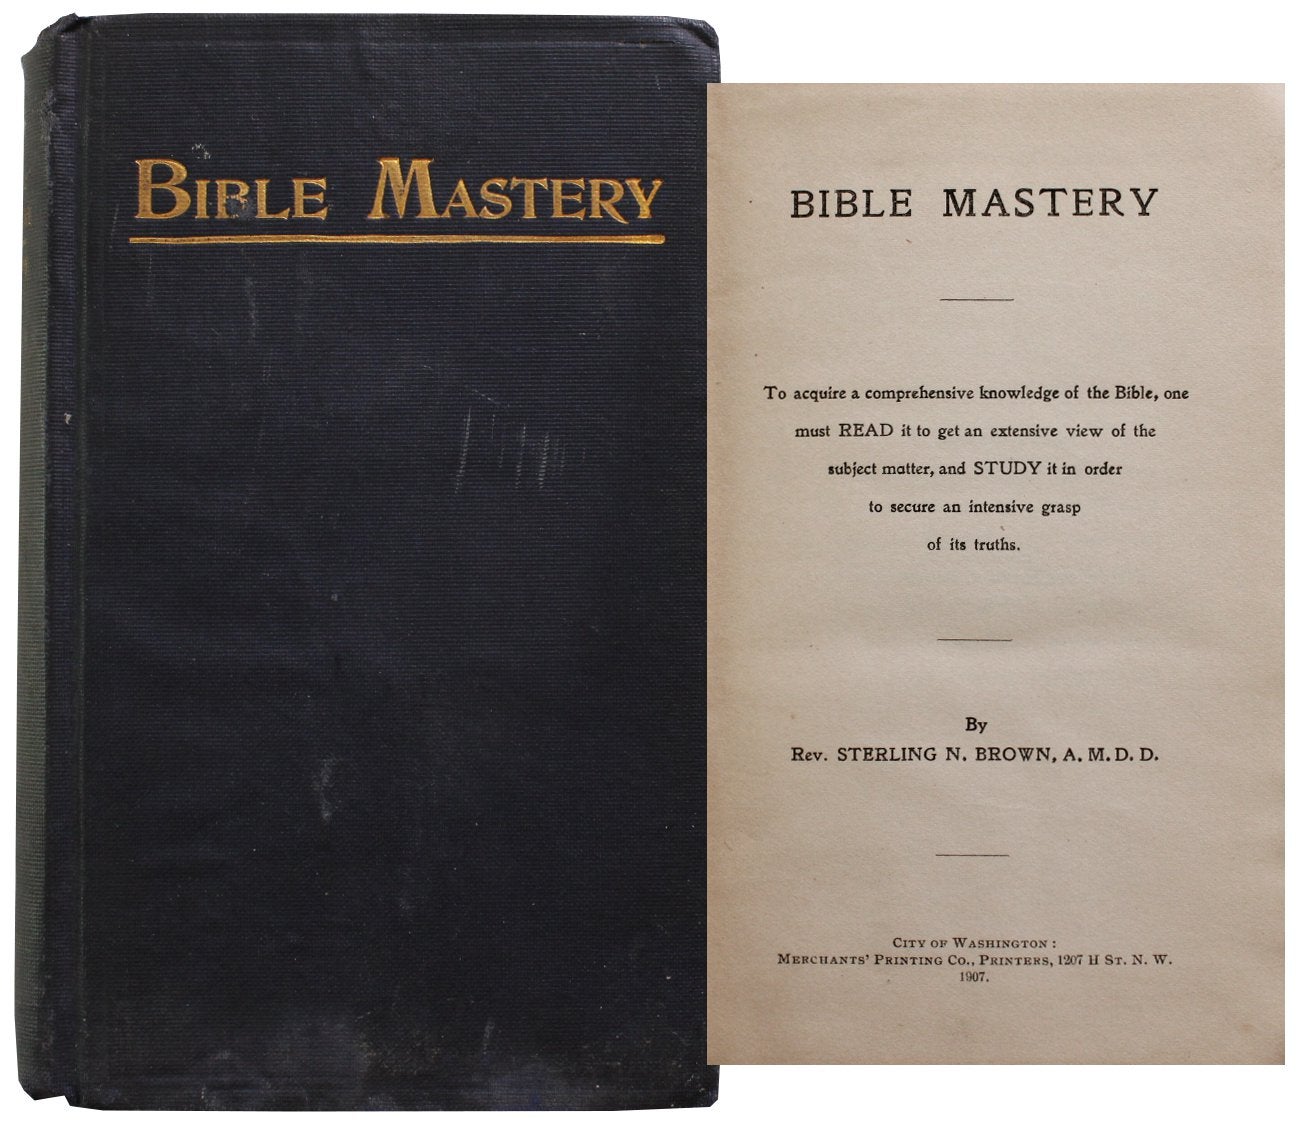 Bible Mastery. Rev. Sterling Brown, elson.